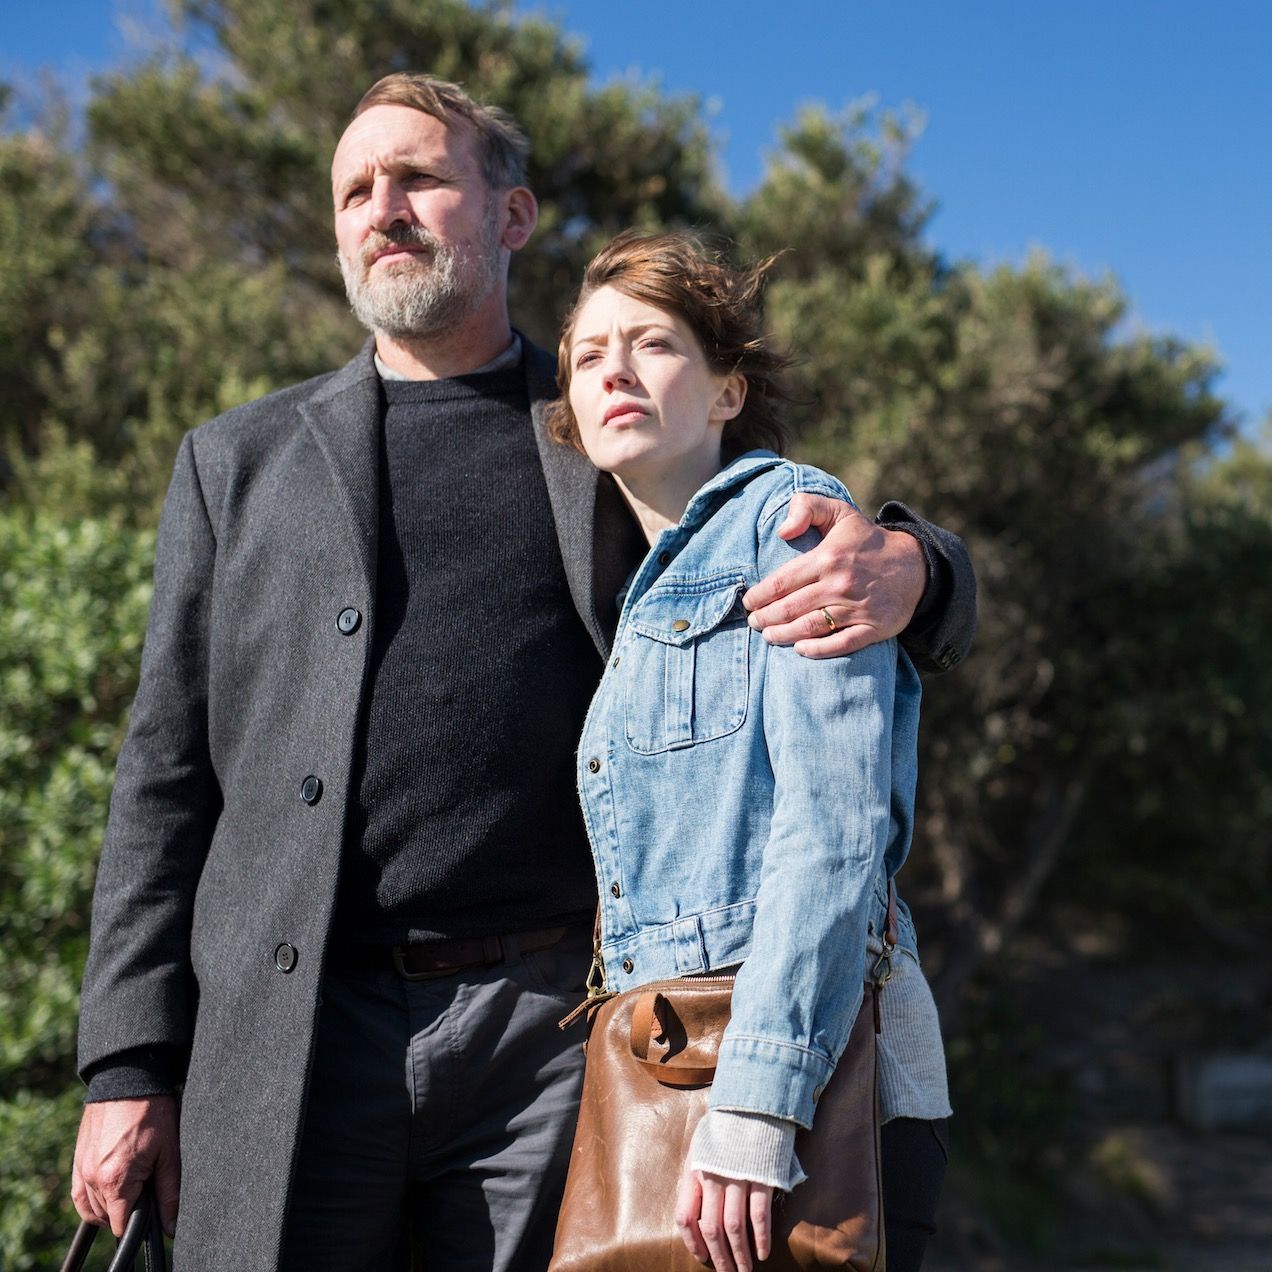 Matt and Nora in 'The Leftovers'